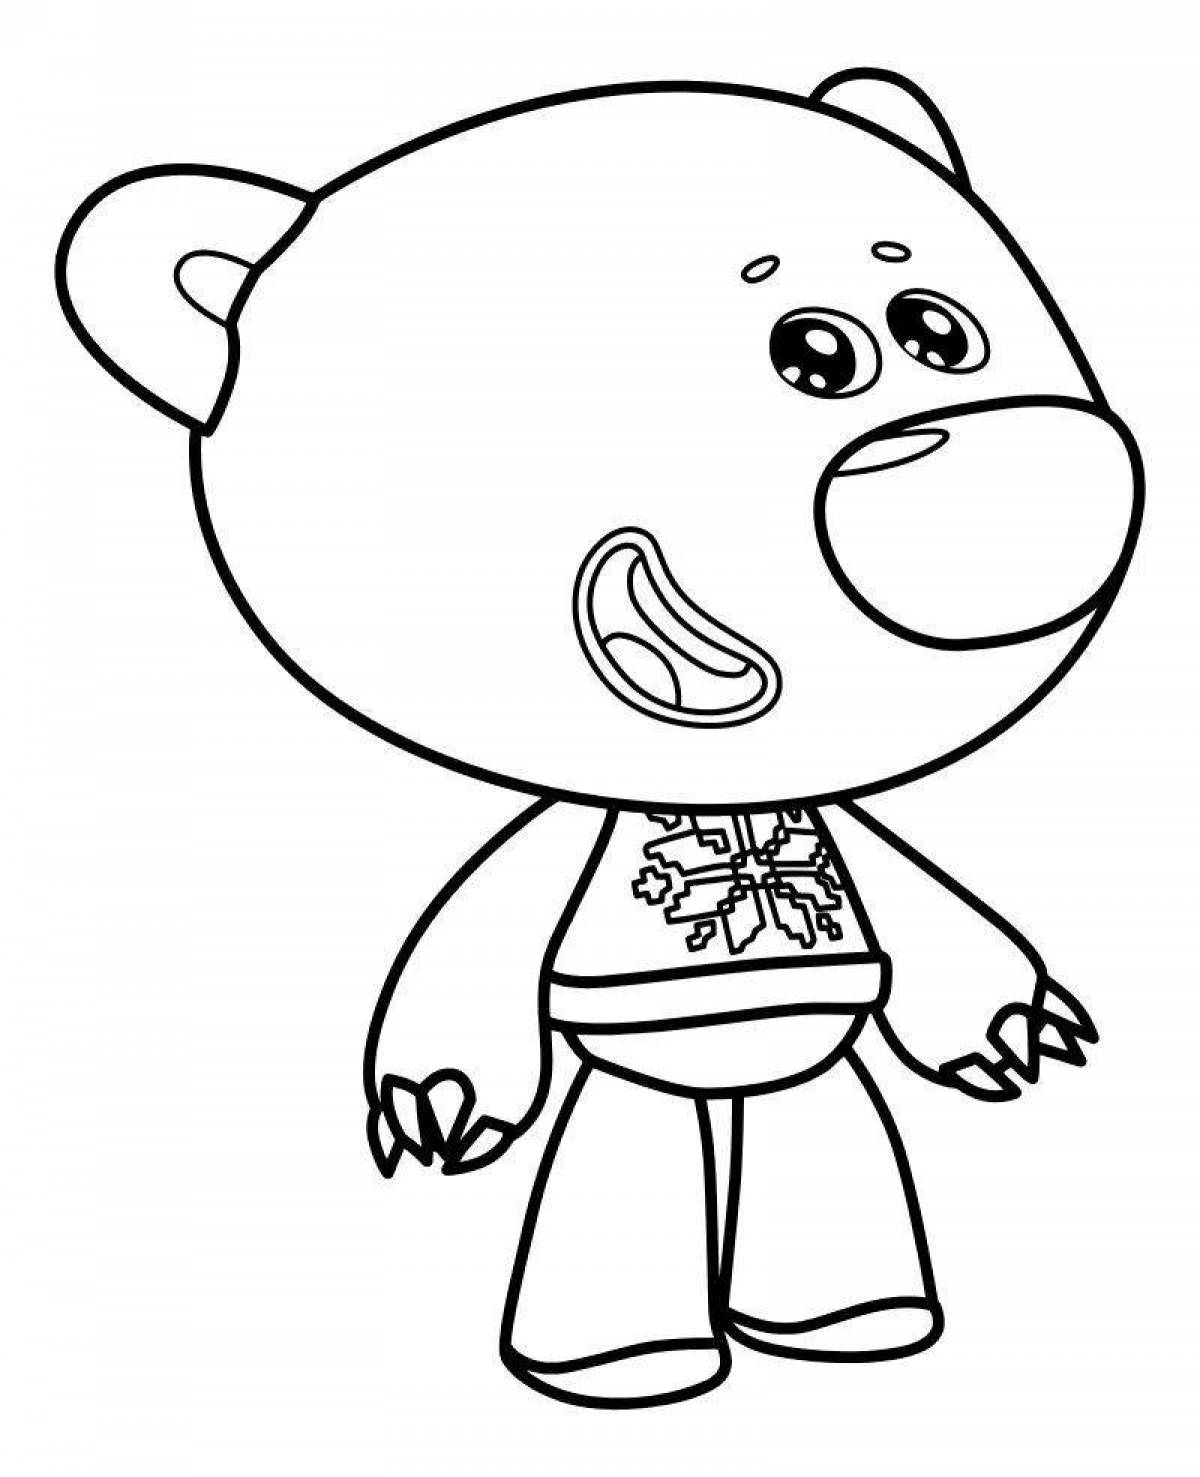 Fairy bears on the sea coloring page